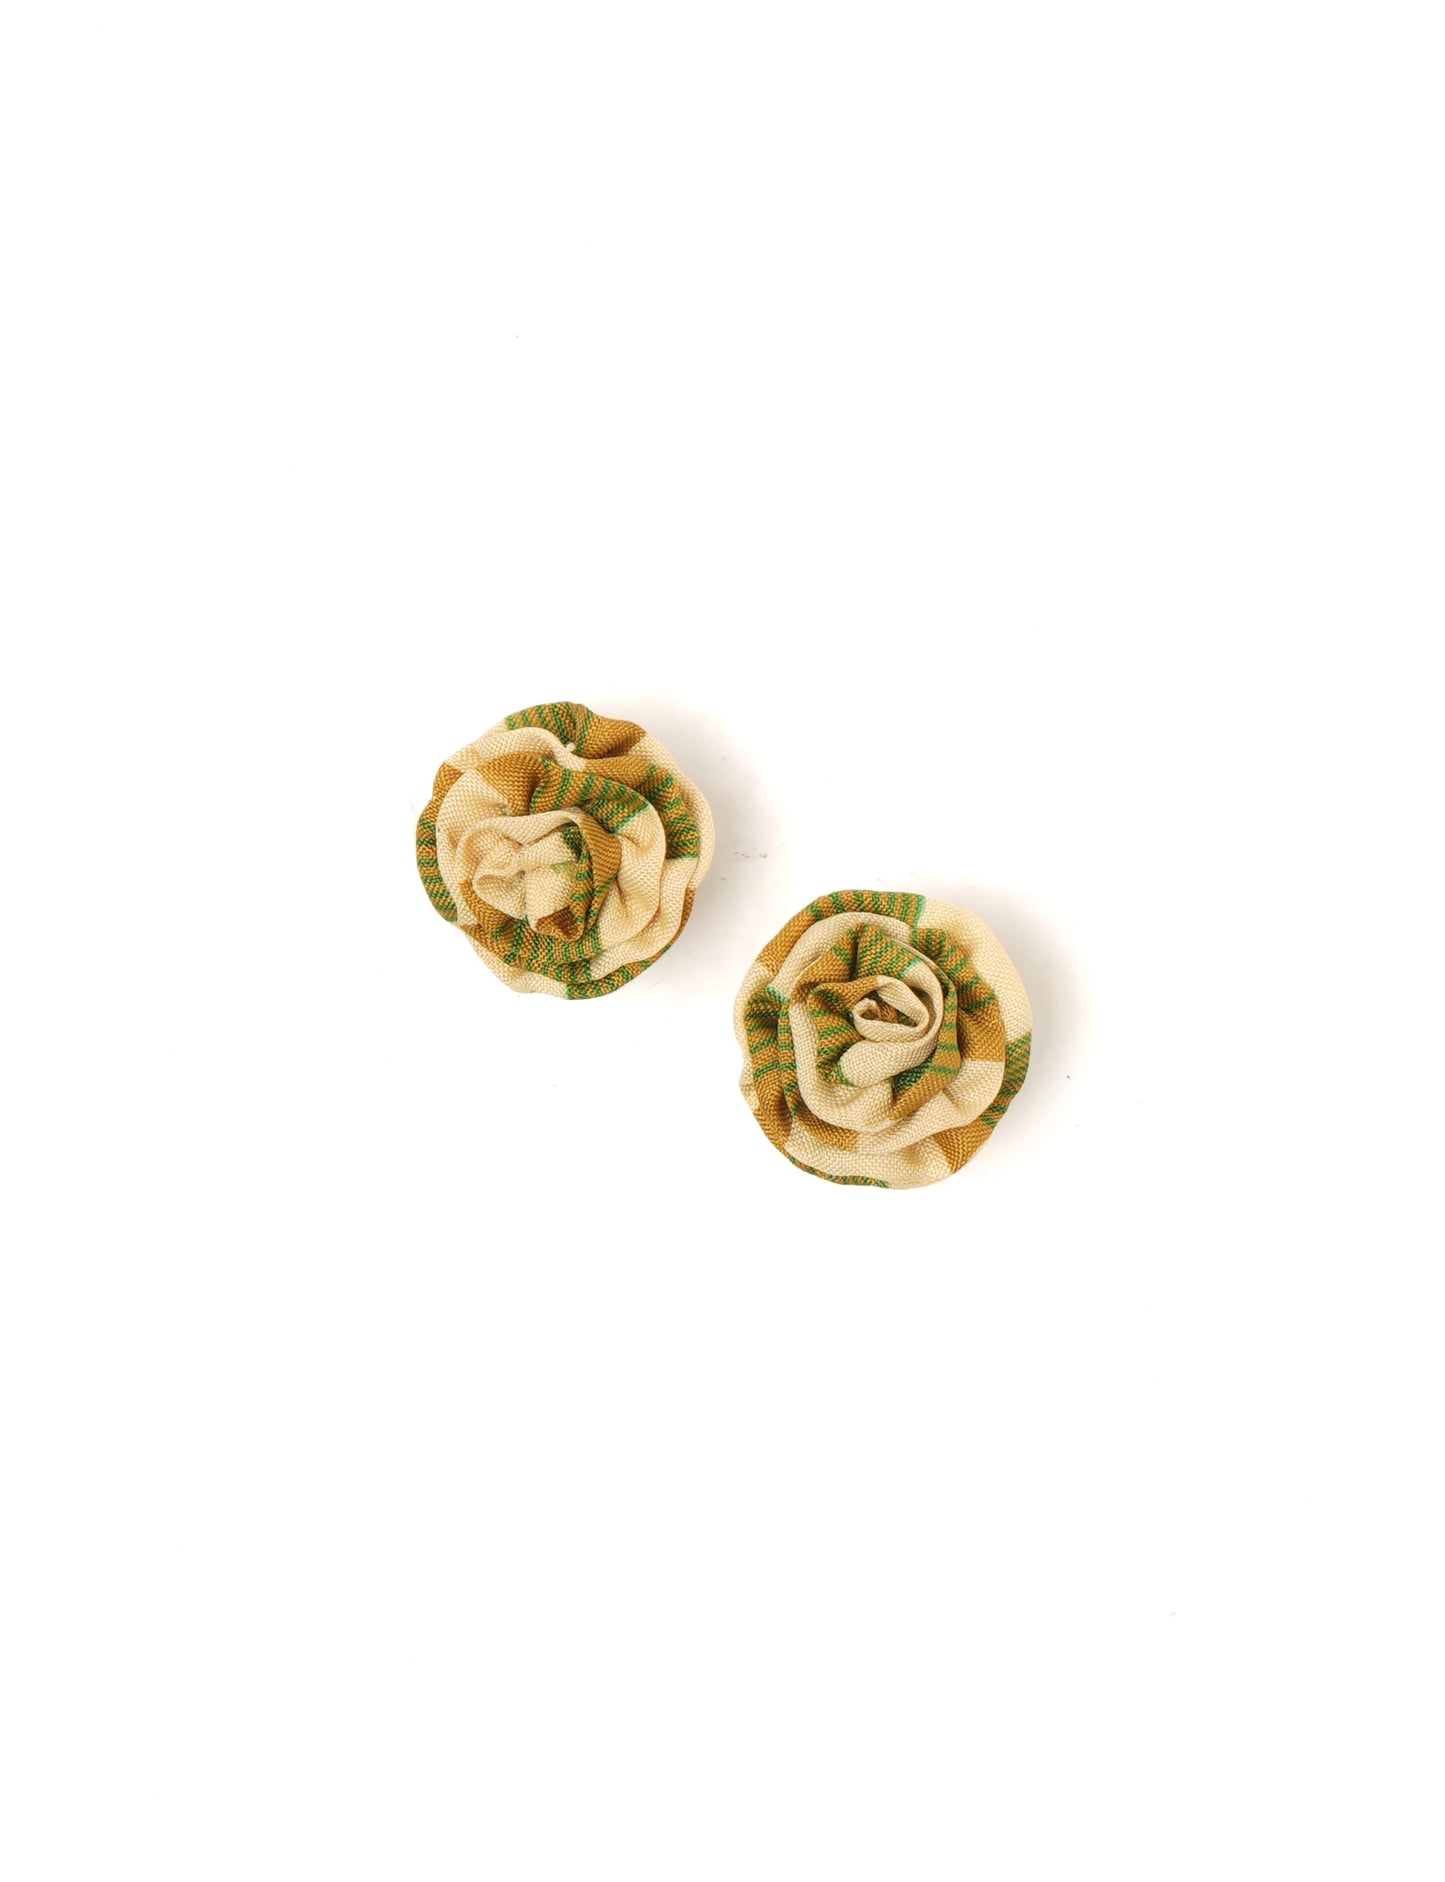 Elevate your elegance with Ruffle Earrings, delicate fabric studs showcasing Indian Aari embroidery. These eco-friendly earrings feature intricate floral patterns, embodying ethical and green fashion. Hypoallergenic and skin-friendly, our studs make a stylish statement in sustainable accessorizing."




